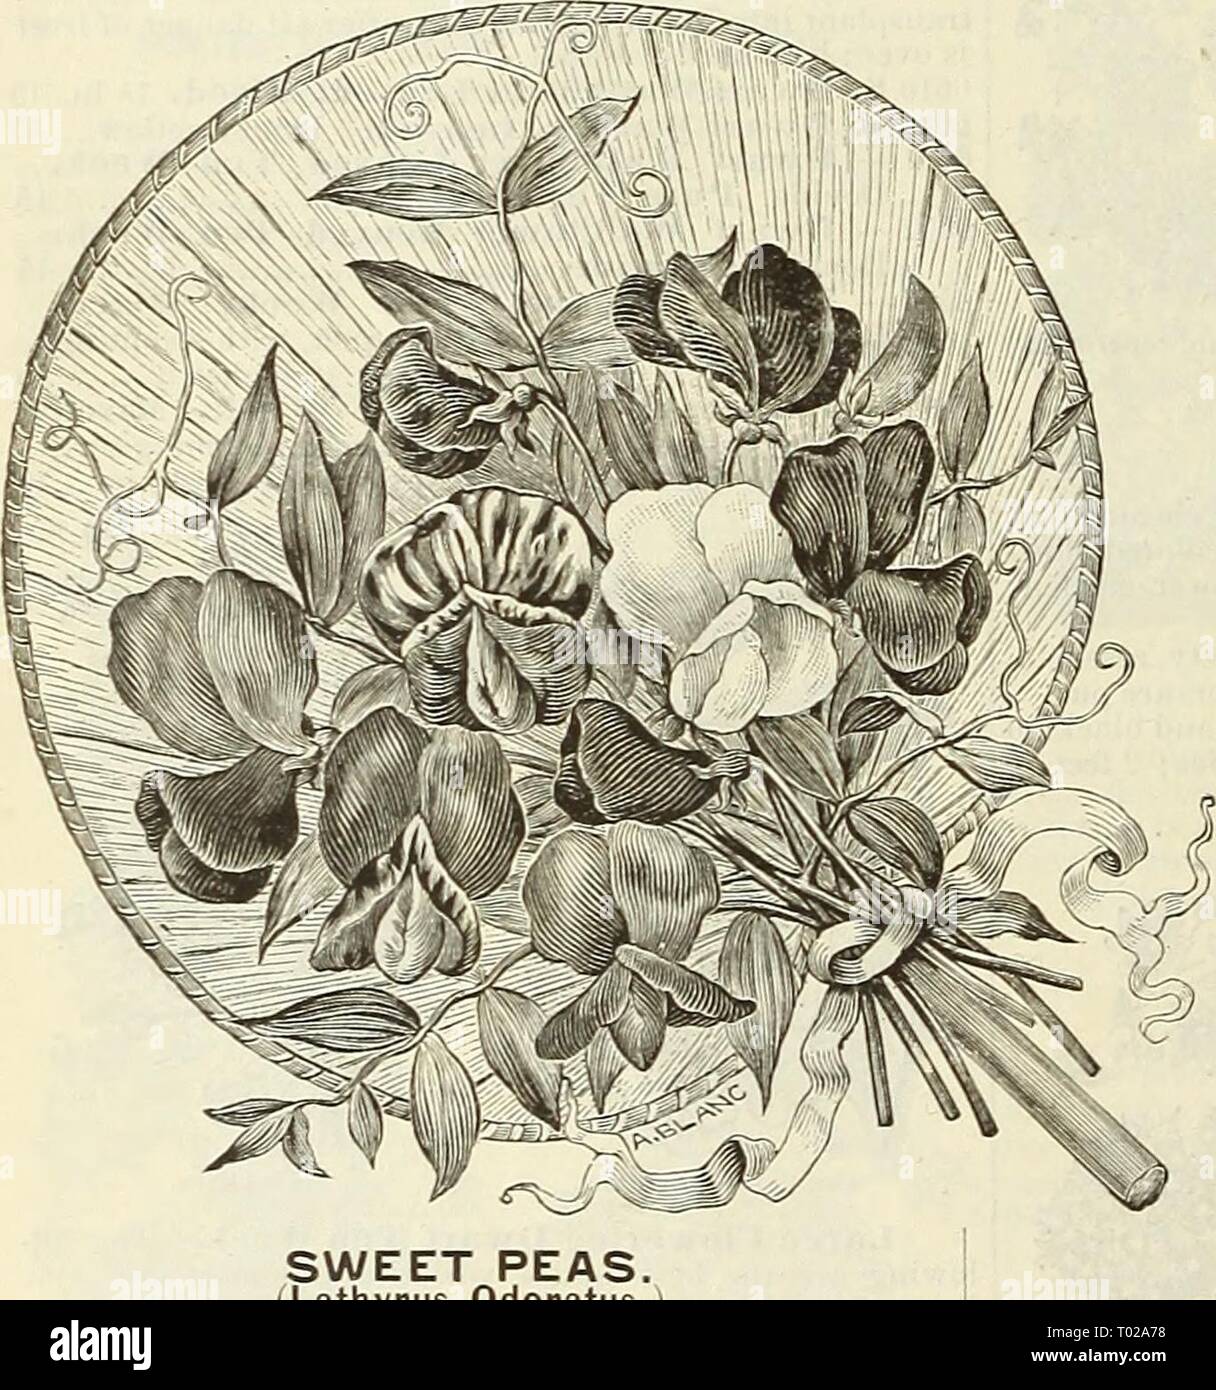 Dreer's garden calendar for 1888 . dreersgardencale1888henr Year: 1888  SWEET PEAS. (Lathyrus Odoratus.) Beautiful fragrant free flowering plants, thriving in any open situation ; excellent for screening unsightlv ob- jects; will bloom all summer and autumn if the flowers are cut freely and the pods picked off as they appear. They may be sown in autumn in this section : early sowing is necessary; hardv annuals; 6 feet. 5993 L. Blue Bifd. Bright blue 5 5996— Capt. Clarke (Tricolor). White, rose and purple 5 5998— Crown Princess. Blush 5 6004— Invincible Carmine. Bright carmine 10 5997 ' Scarlet Stock Photo